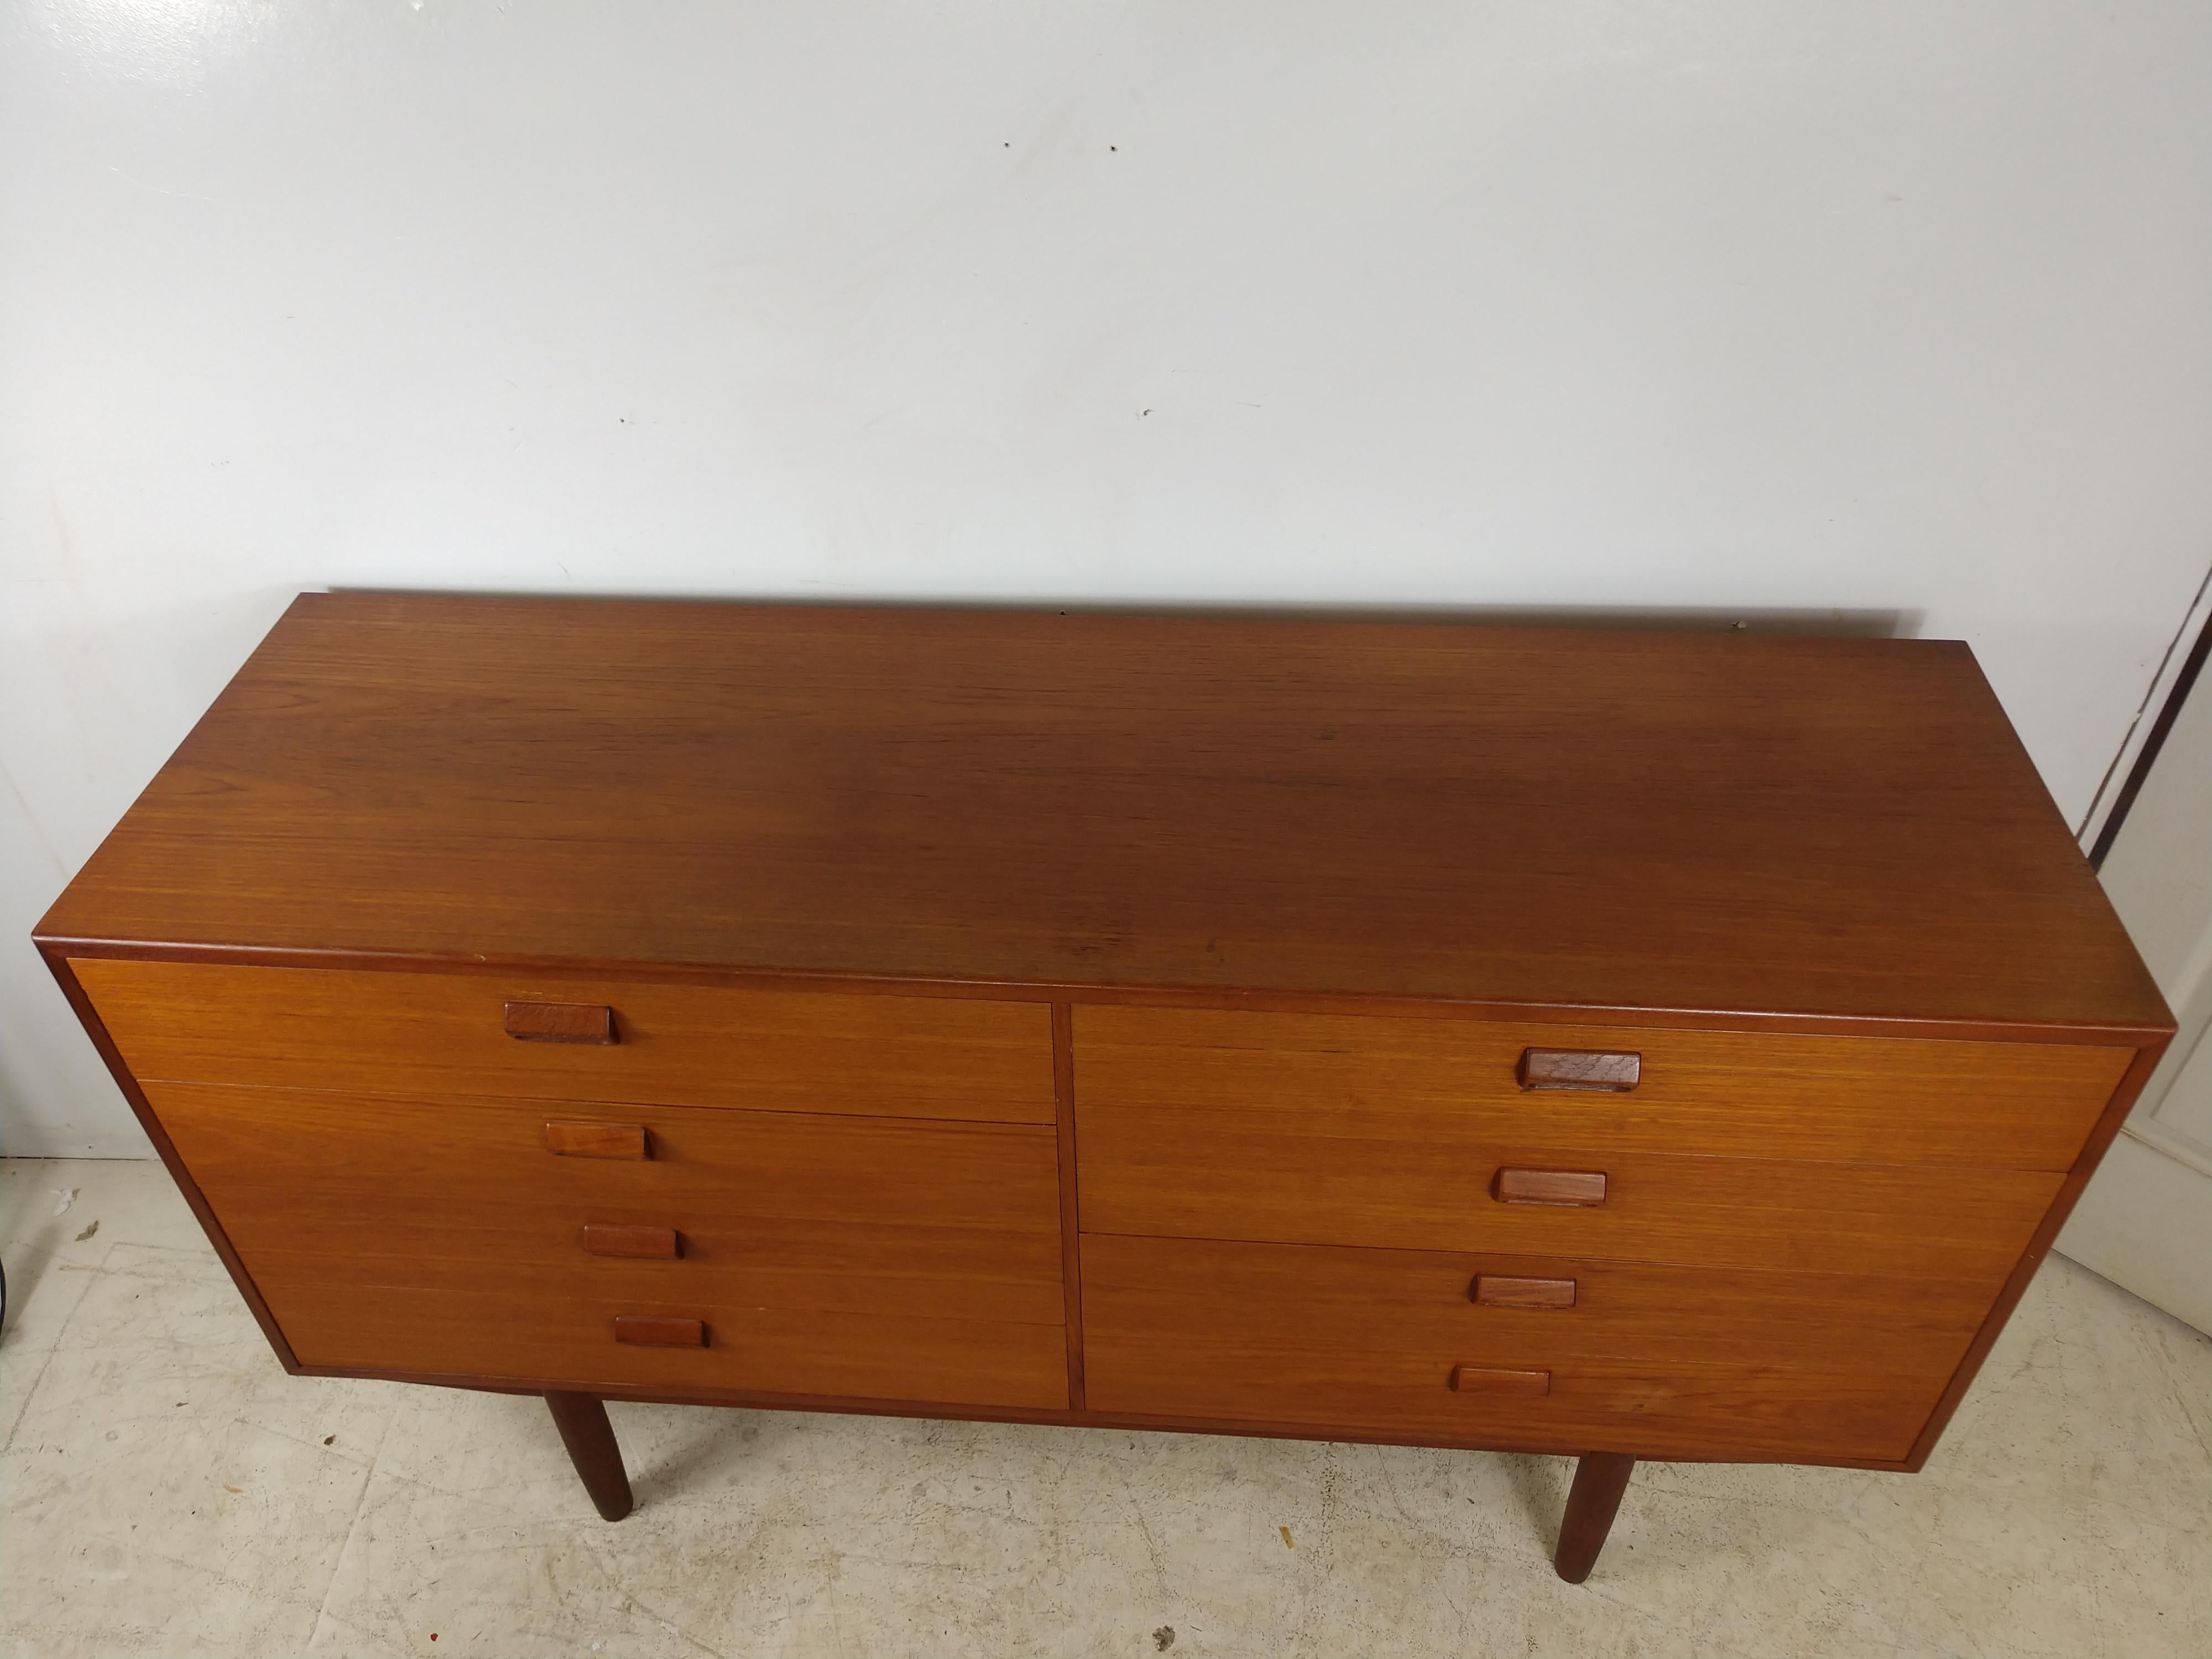 Fabulous teak 8 drawer double dresser/credenza by Borge Mogensen. In excellent vintage condition with a small blemish on one drawer front which will be taken care of. Signed on back. Drawers all glide easily.